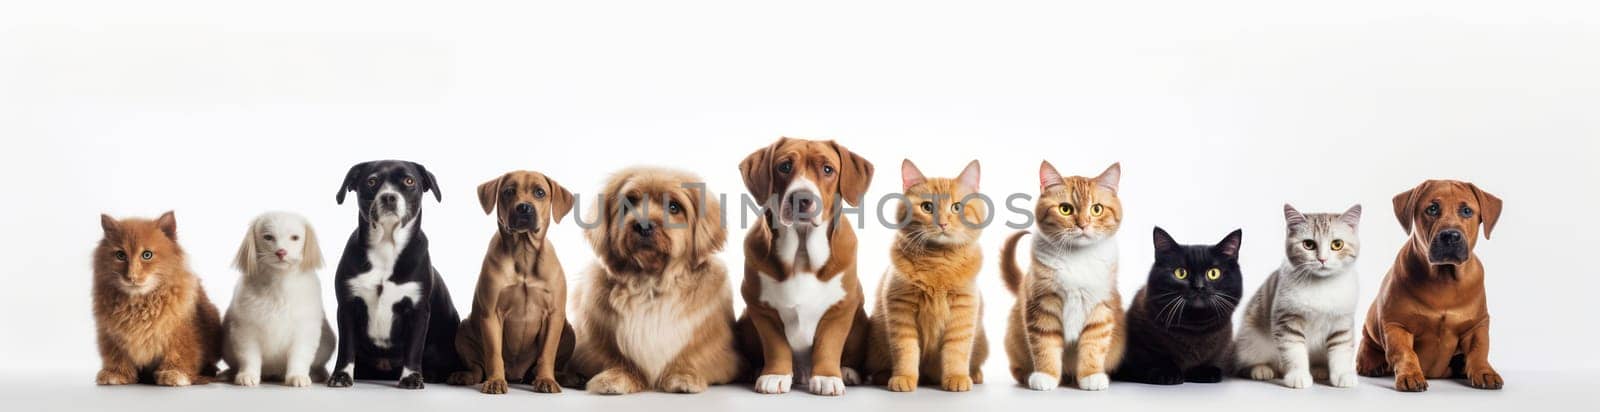 Playful companionship: A Cute Group of White Domestic Dogs and Cats Sitting Together in a Studio with a White Background